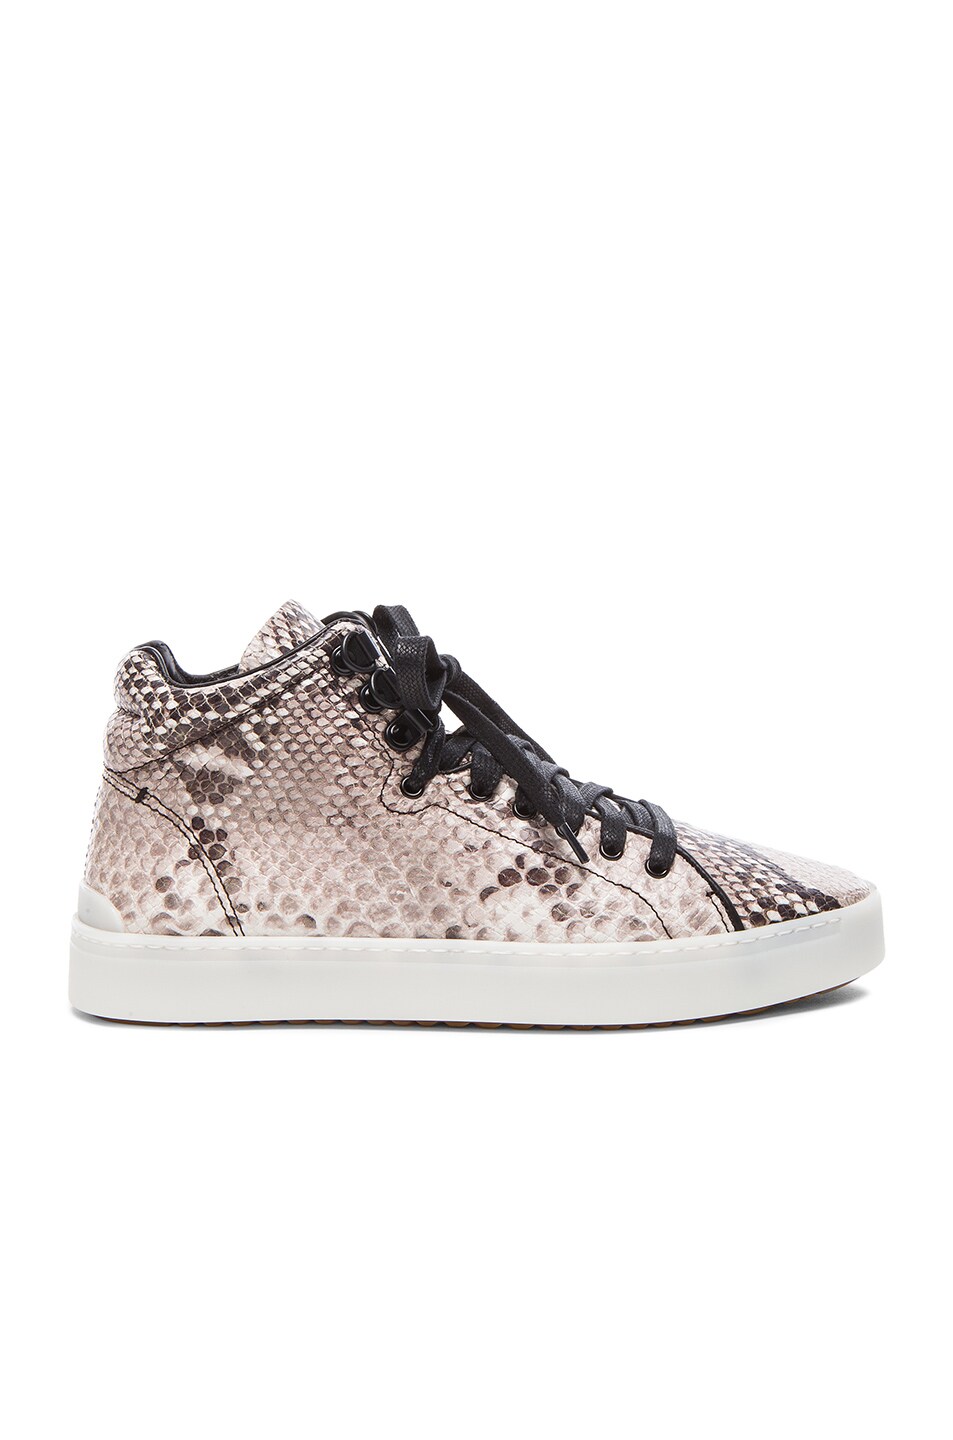 Image 1 of Rag & Bone Kent High Top Leather Sneakers in Fawn Python